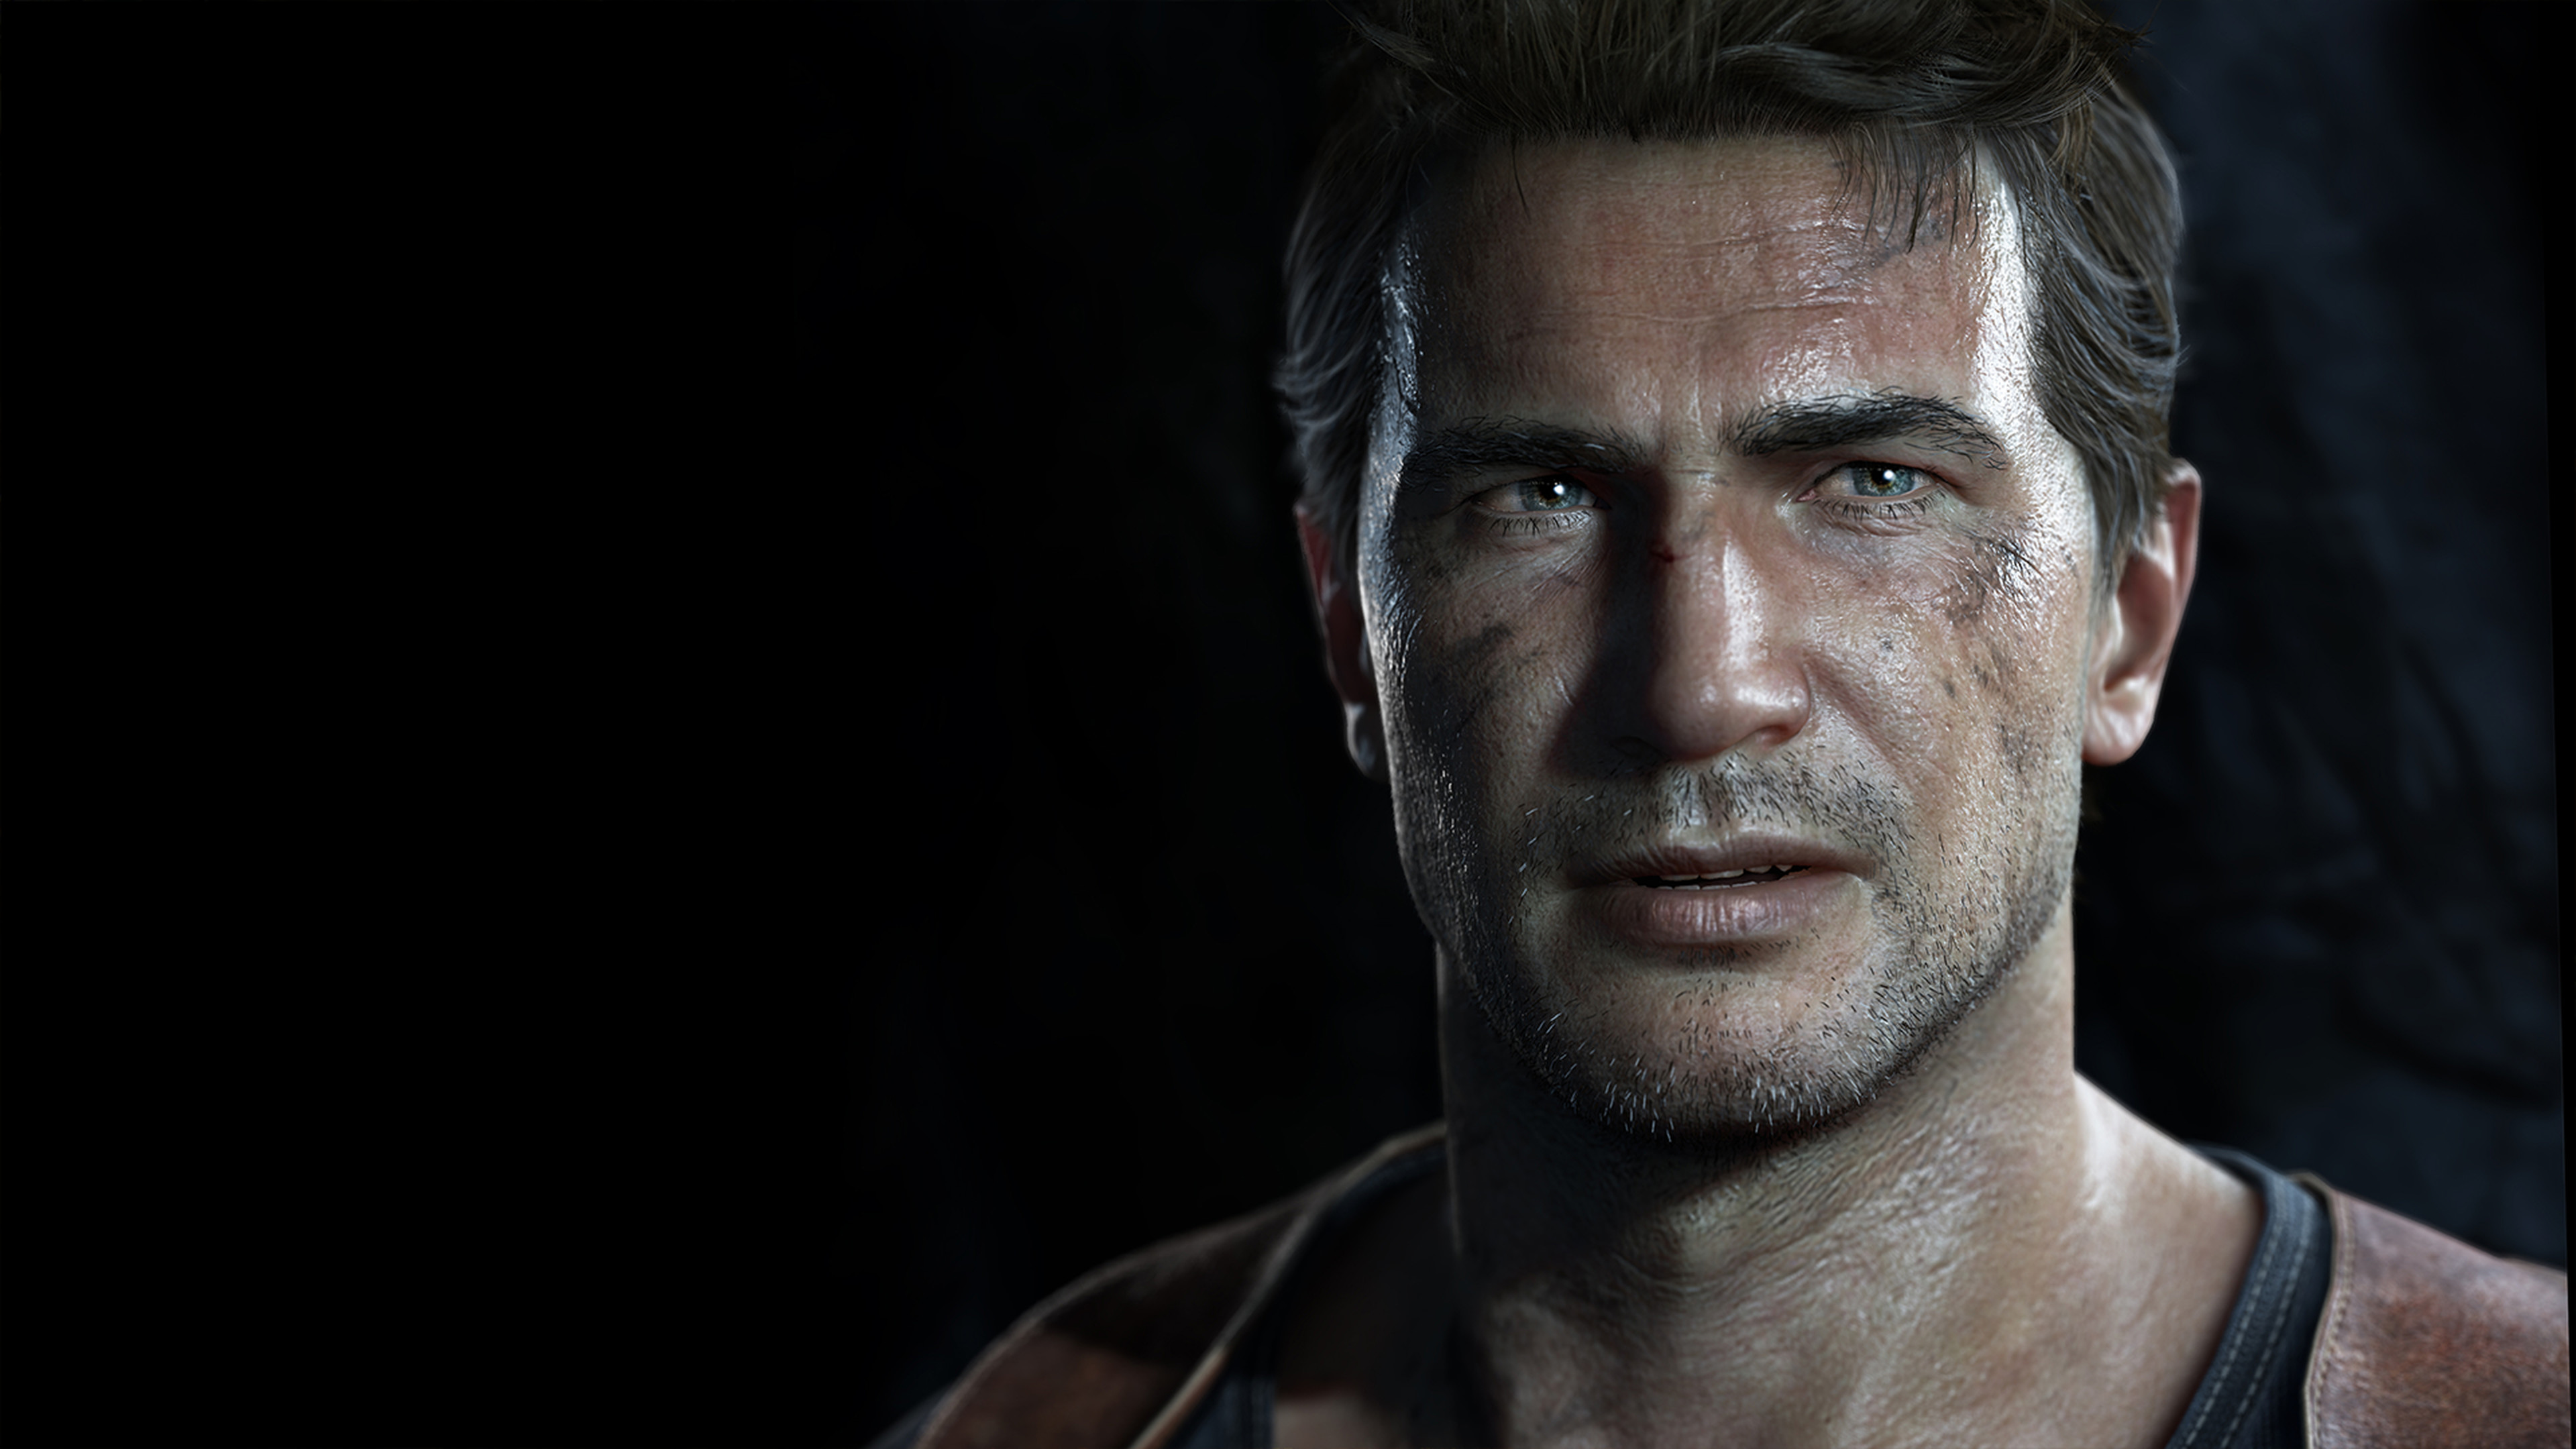 3840x2160 ... Nathan Drake images Nate HD wallpaper and background photos (27013174)  ...